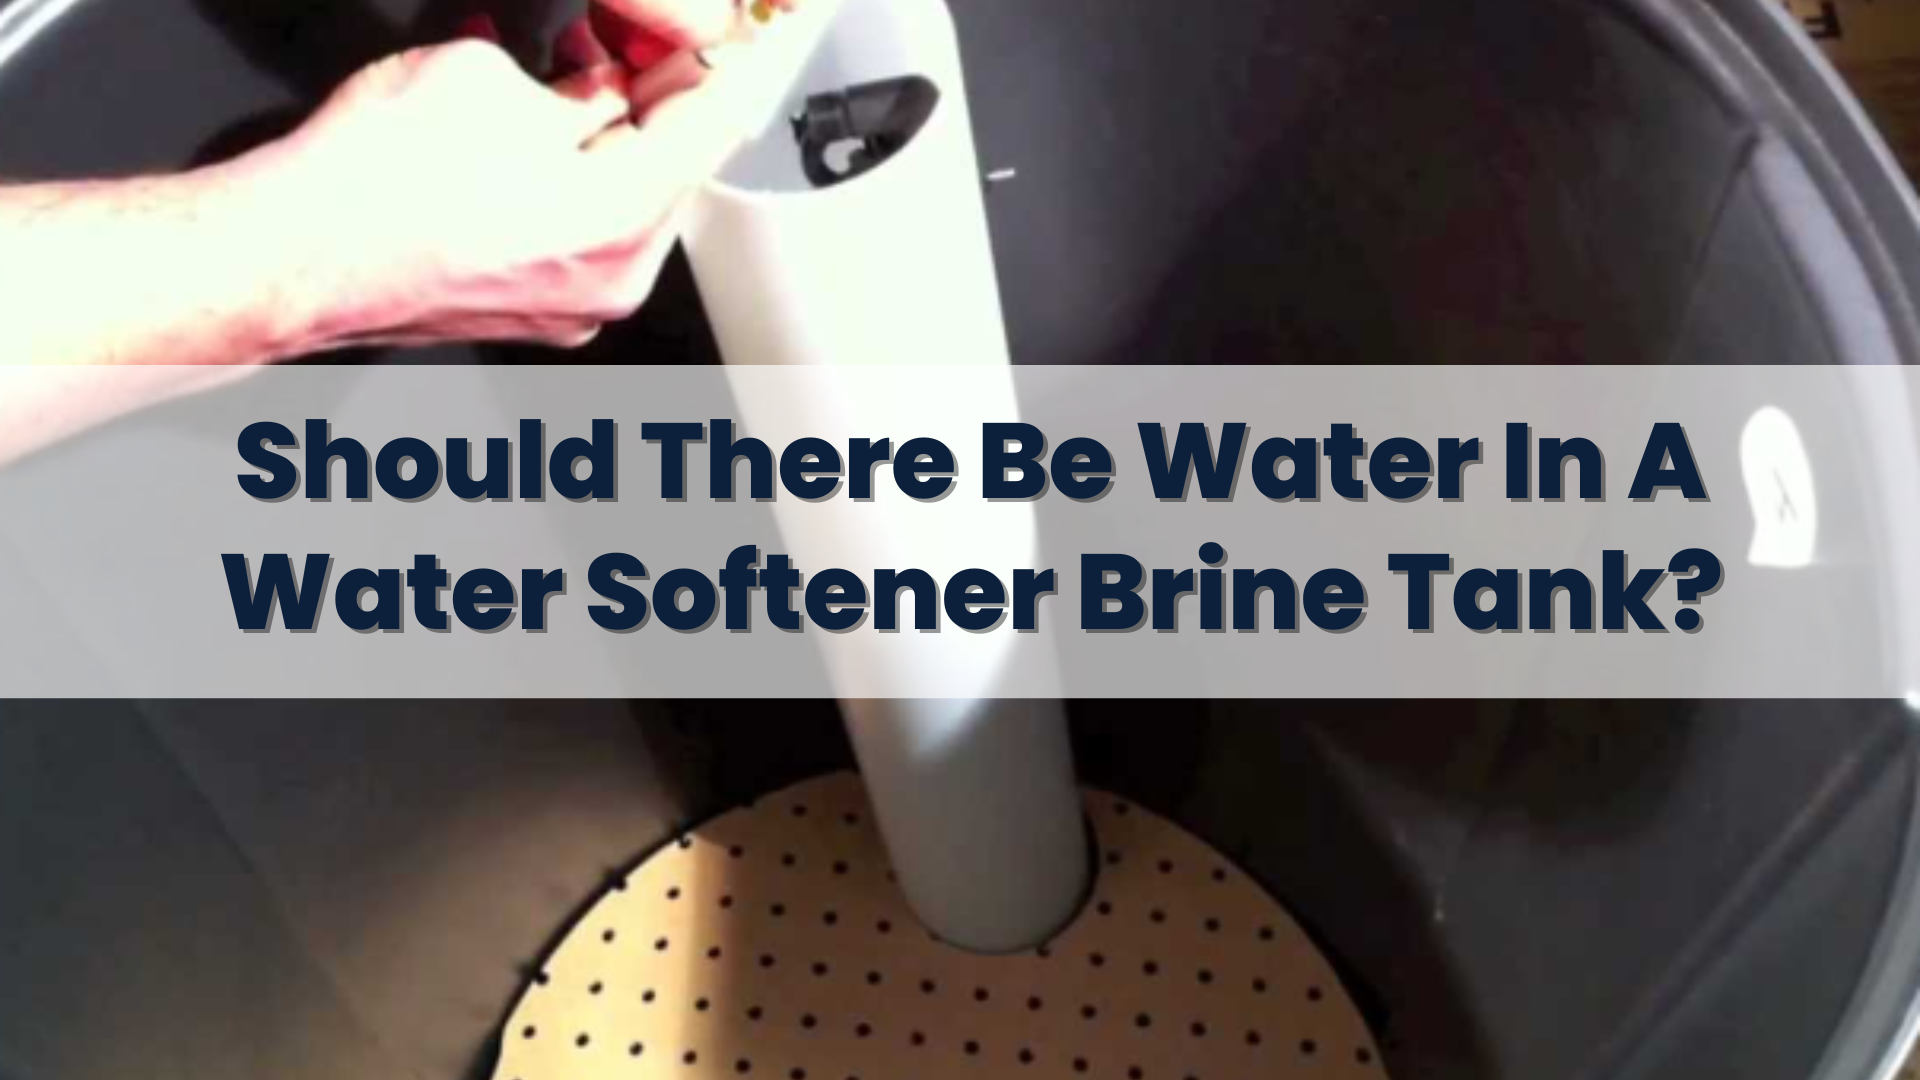 Should There Be Water In A Water Softener Brine Tank